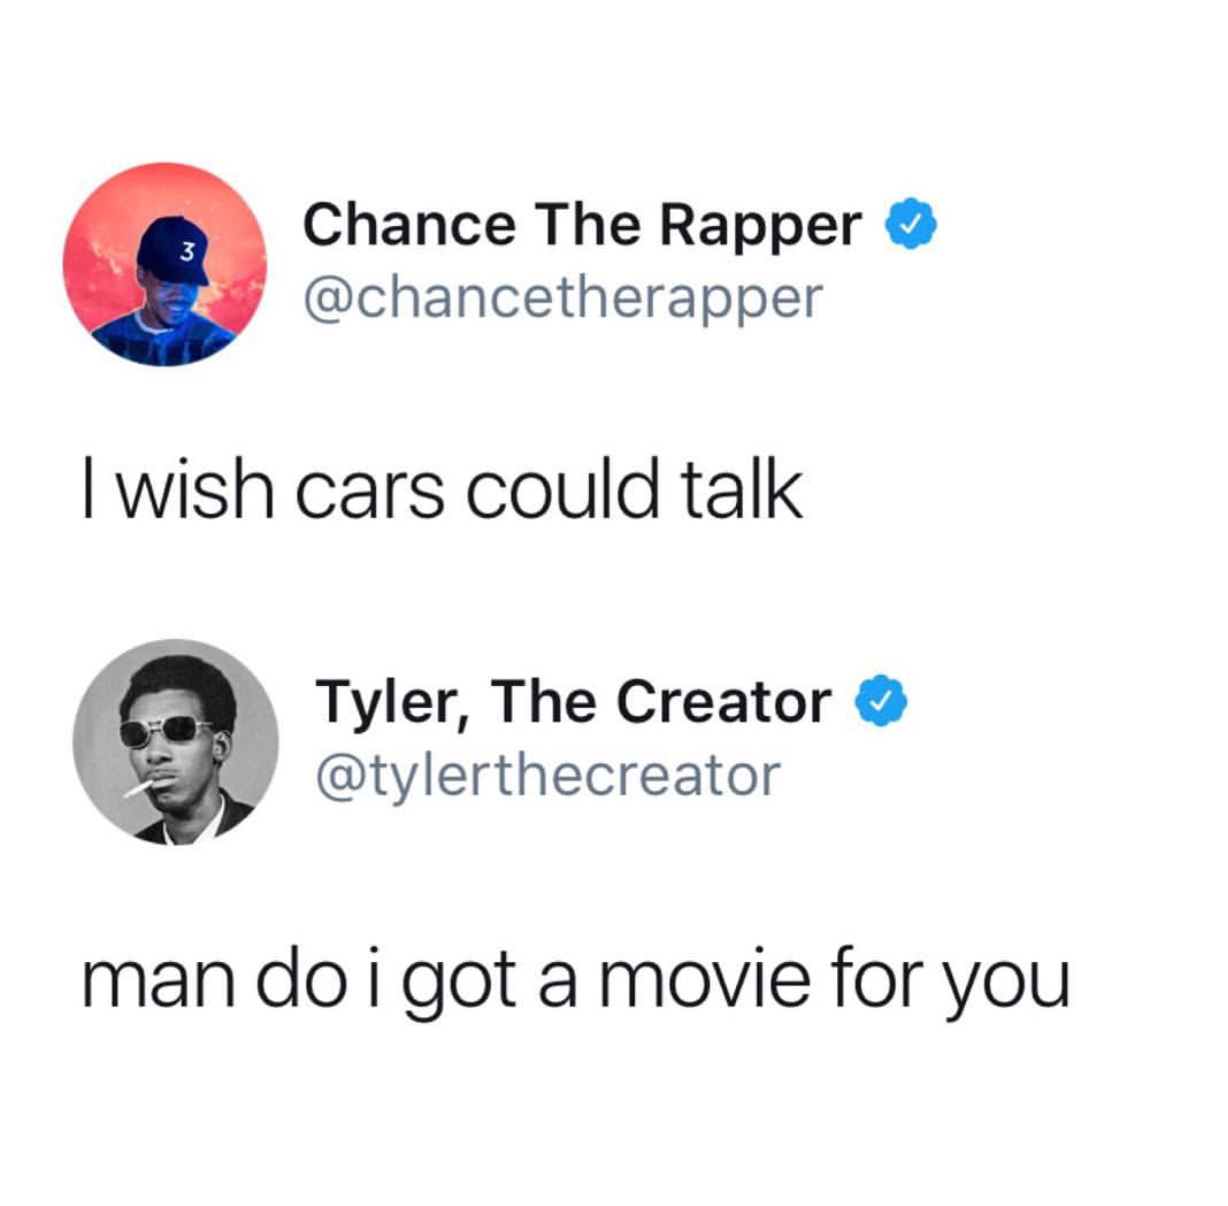 man do i got a movie for you - 3 Chance The Rapper I wish cars could talk Tyler, The Creator man do i got a movie for you